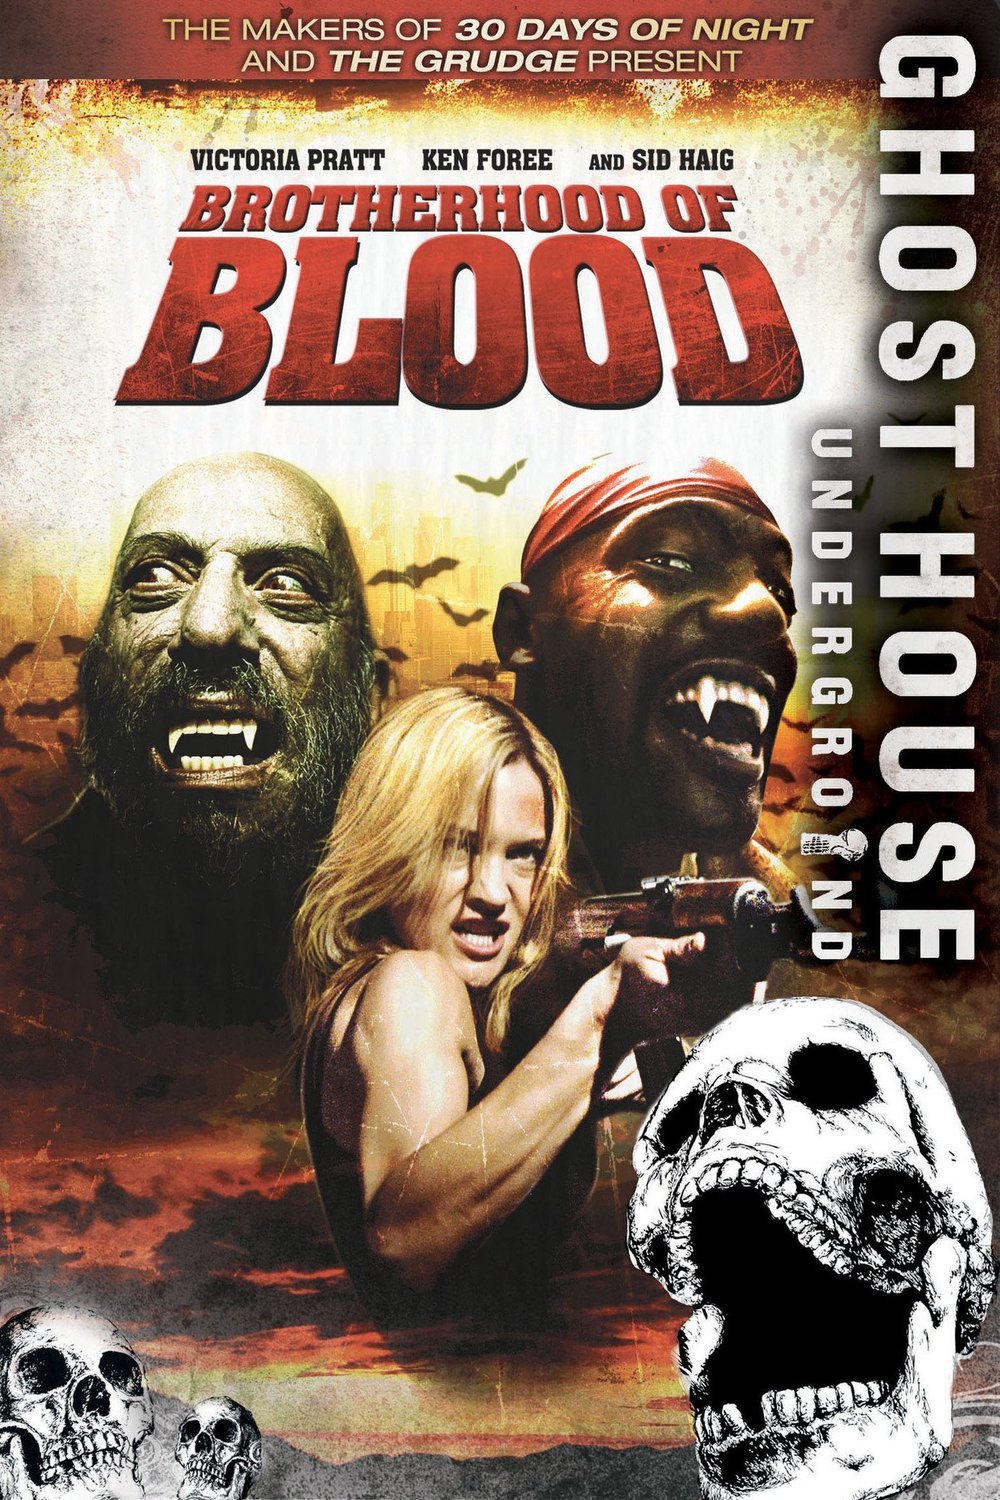 Poster of the movie Brotherhood of Blood